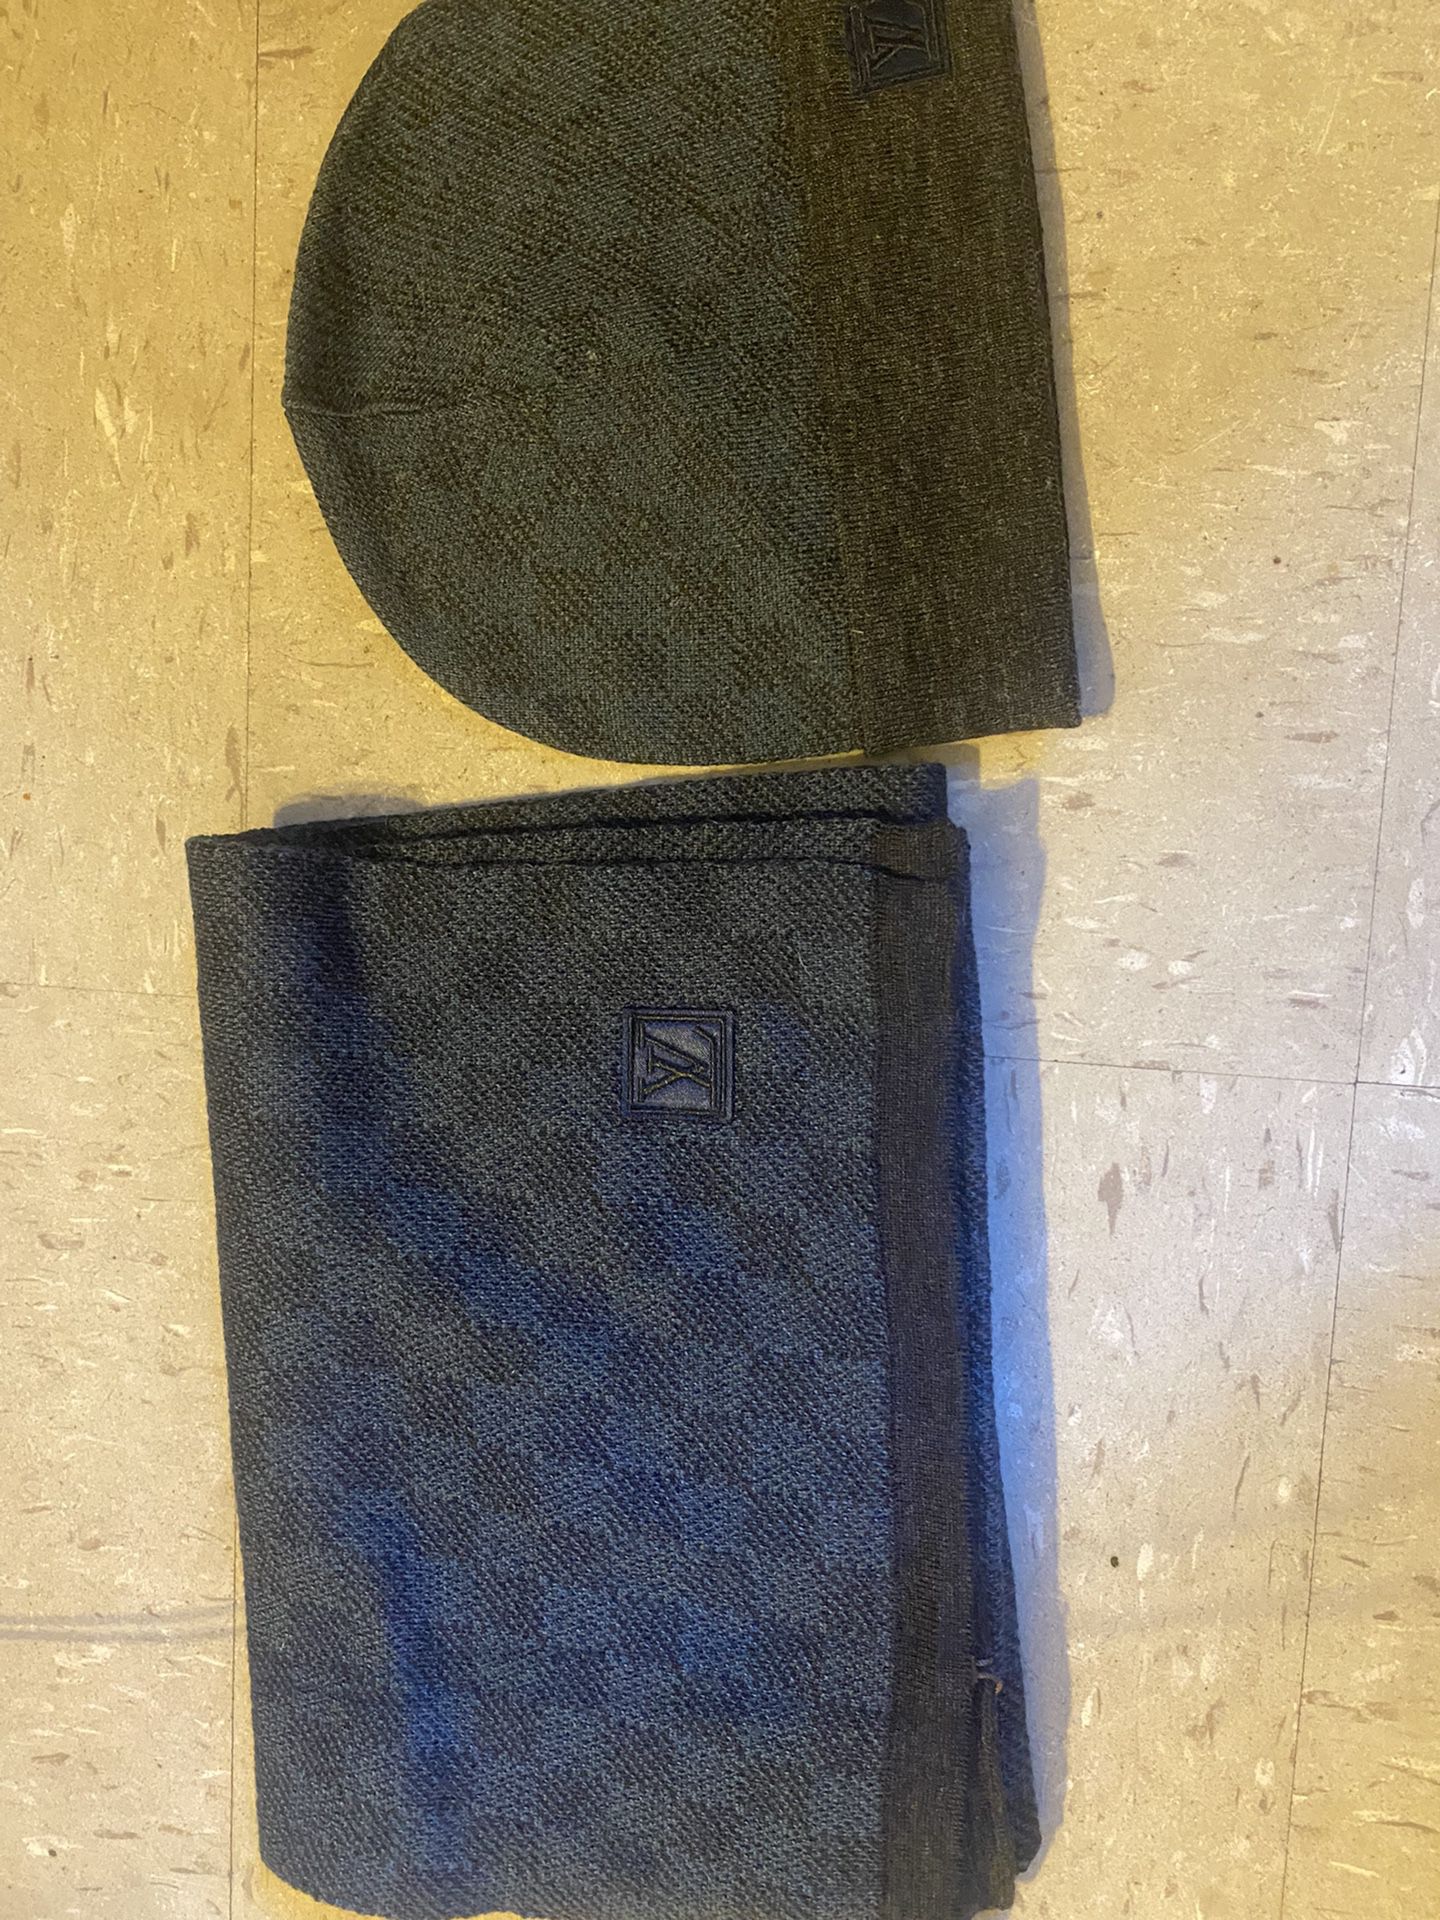 Louis Vuitton Hat And Scarf for Sale in New York, NY - OfferUp